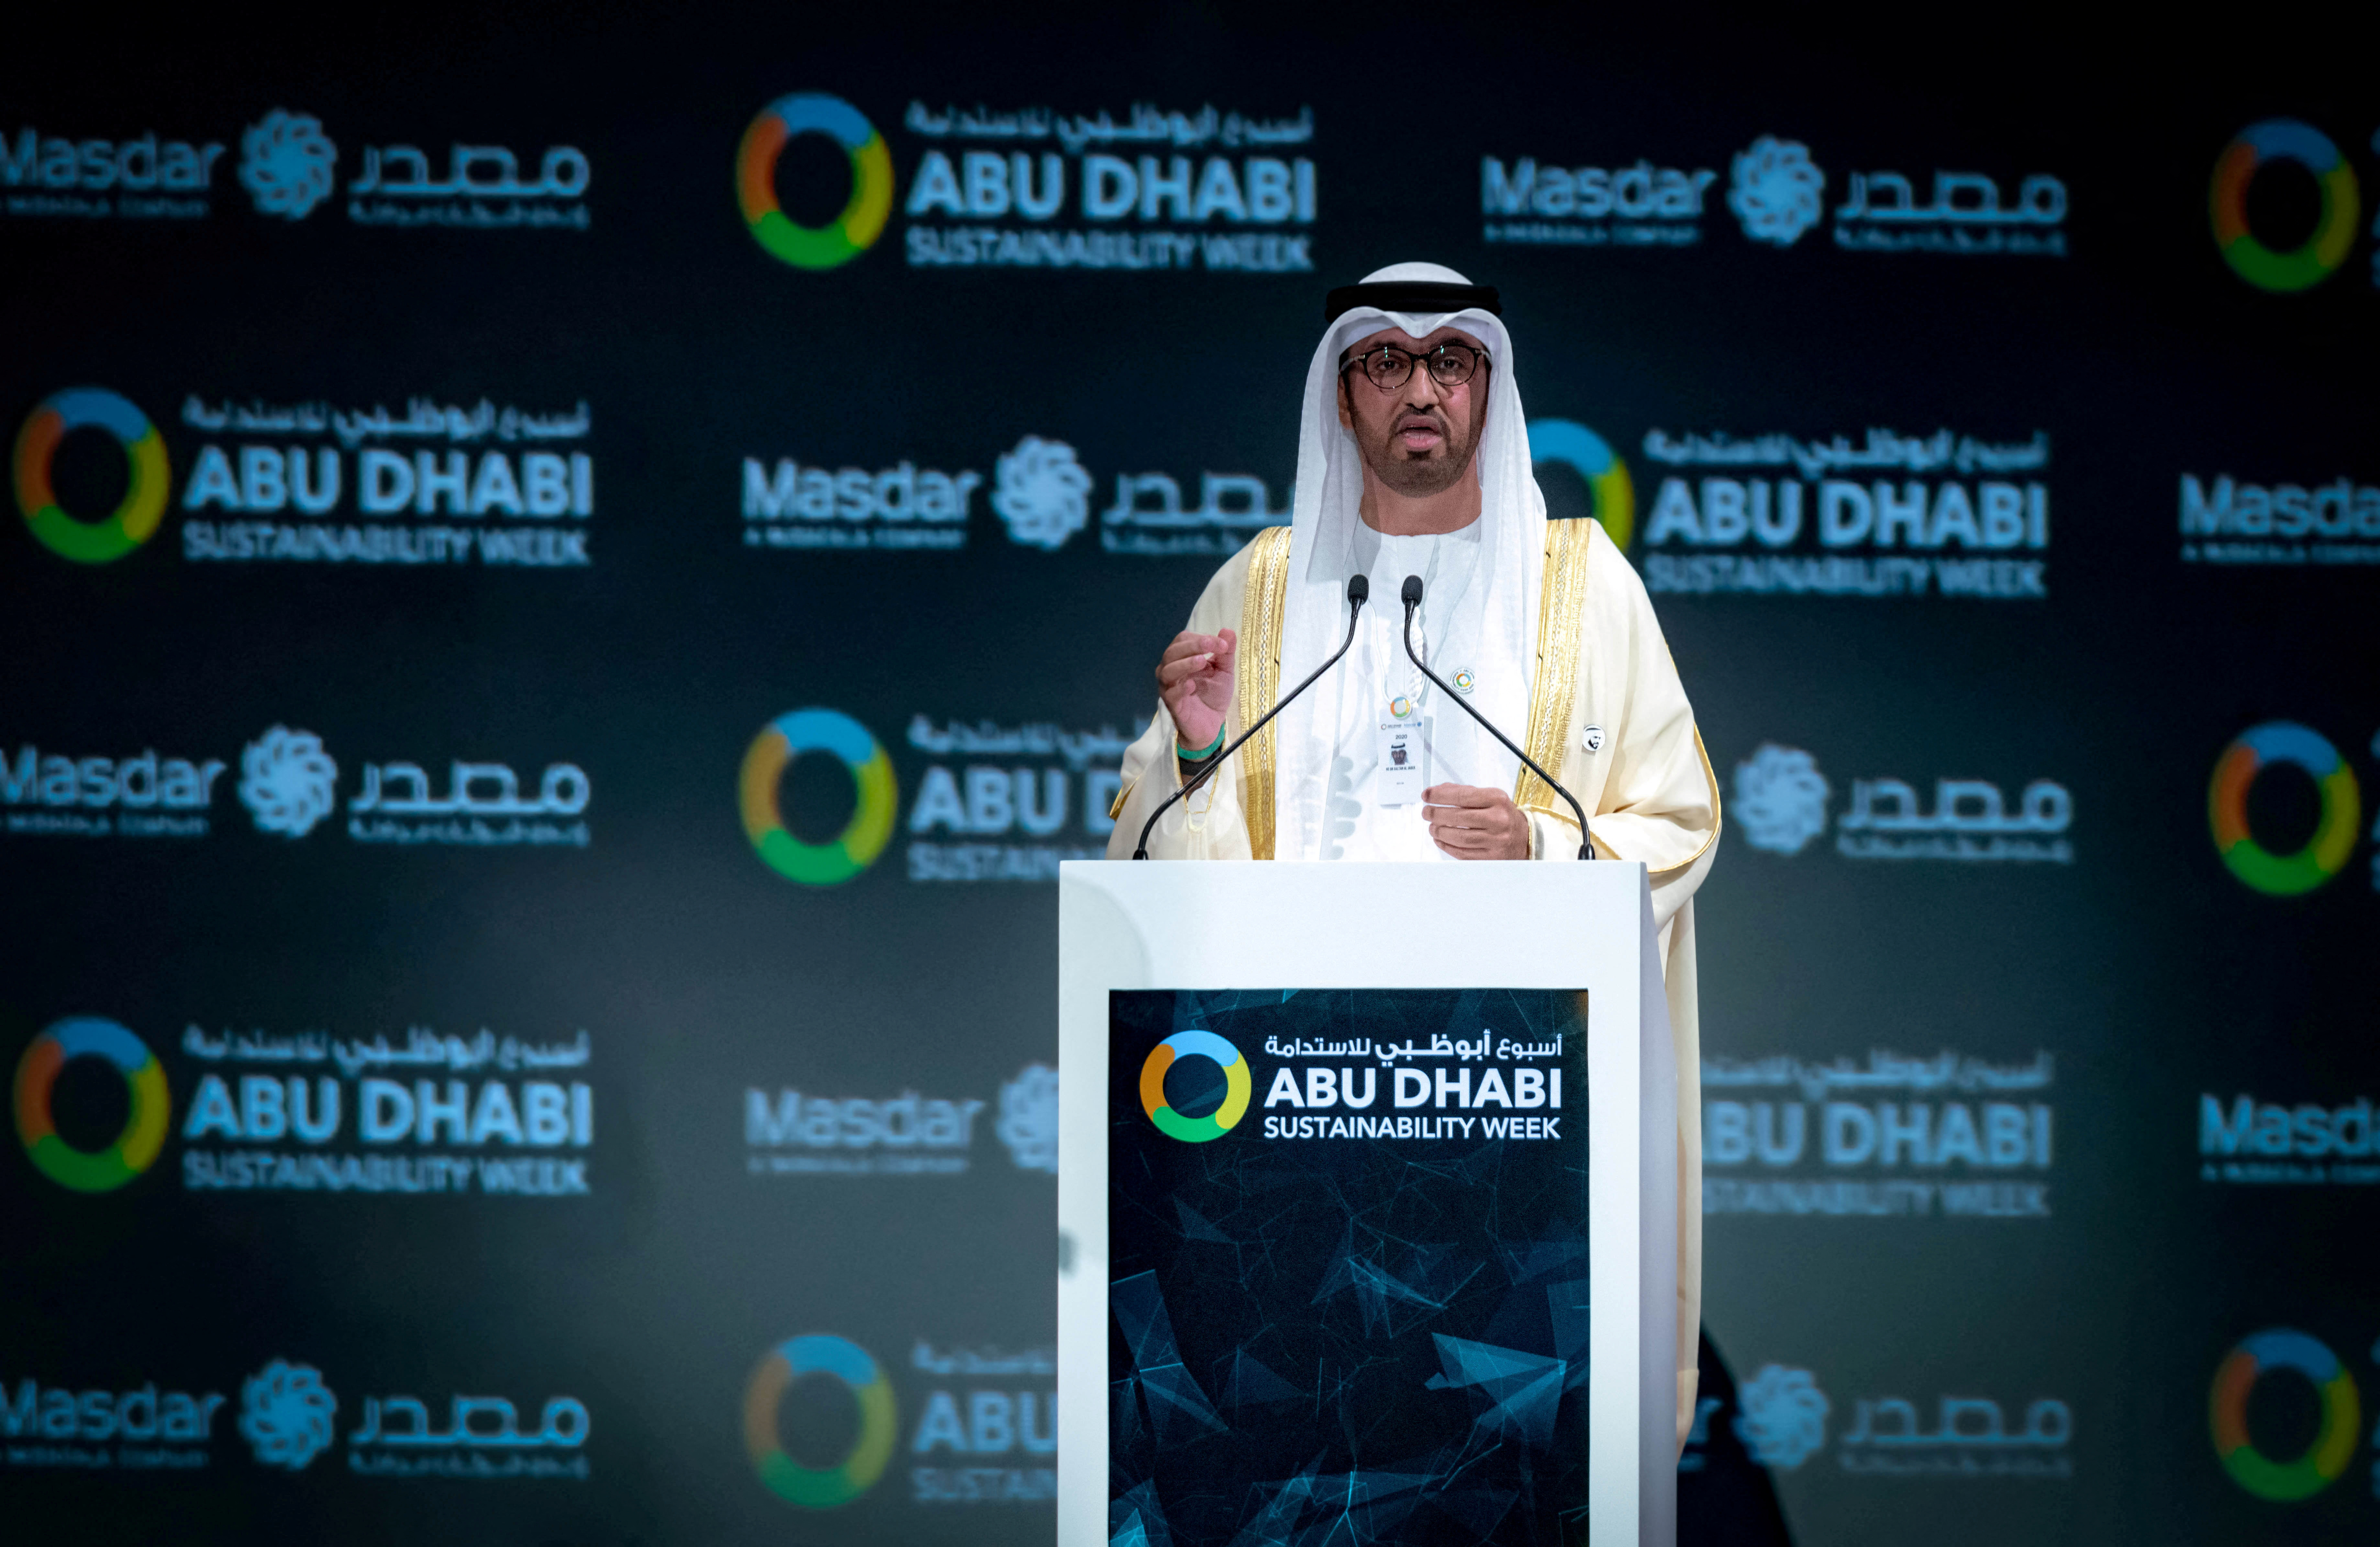 Sultan Ahmed Al Jaber, UAE Minister of State and the Abu Dhabi National Oil Company (ADNOC) Group CEO, speaks the opening ceremony of the World Future Energy Summit in Abu Dhabi